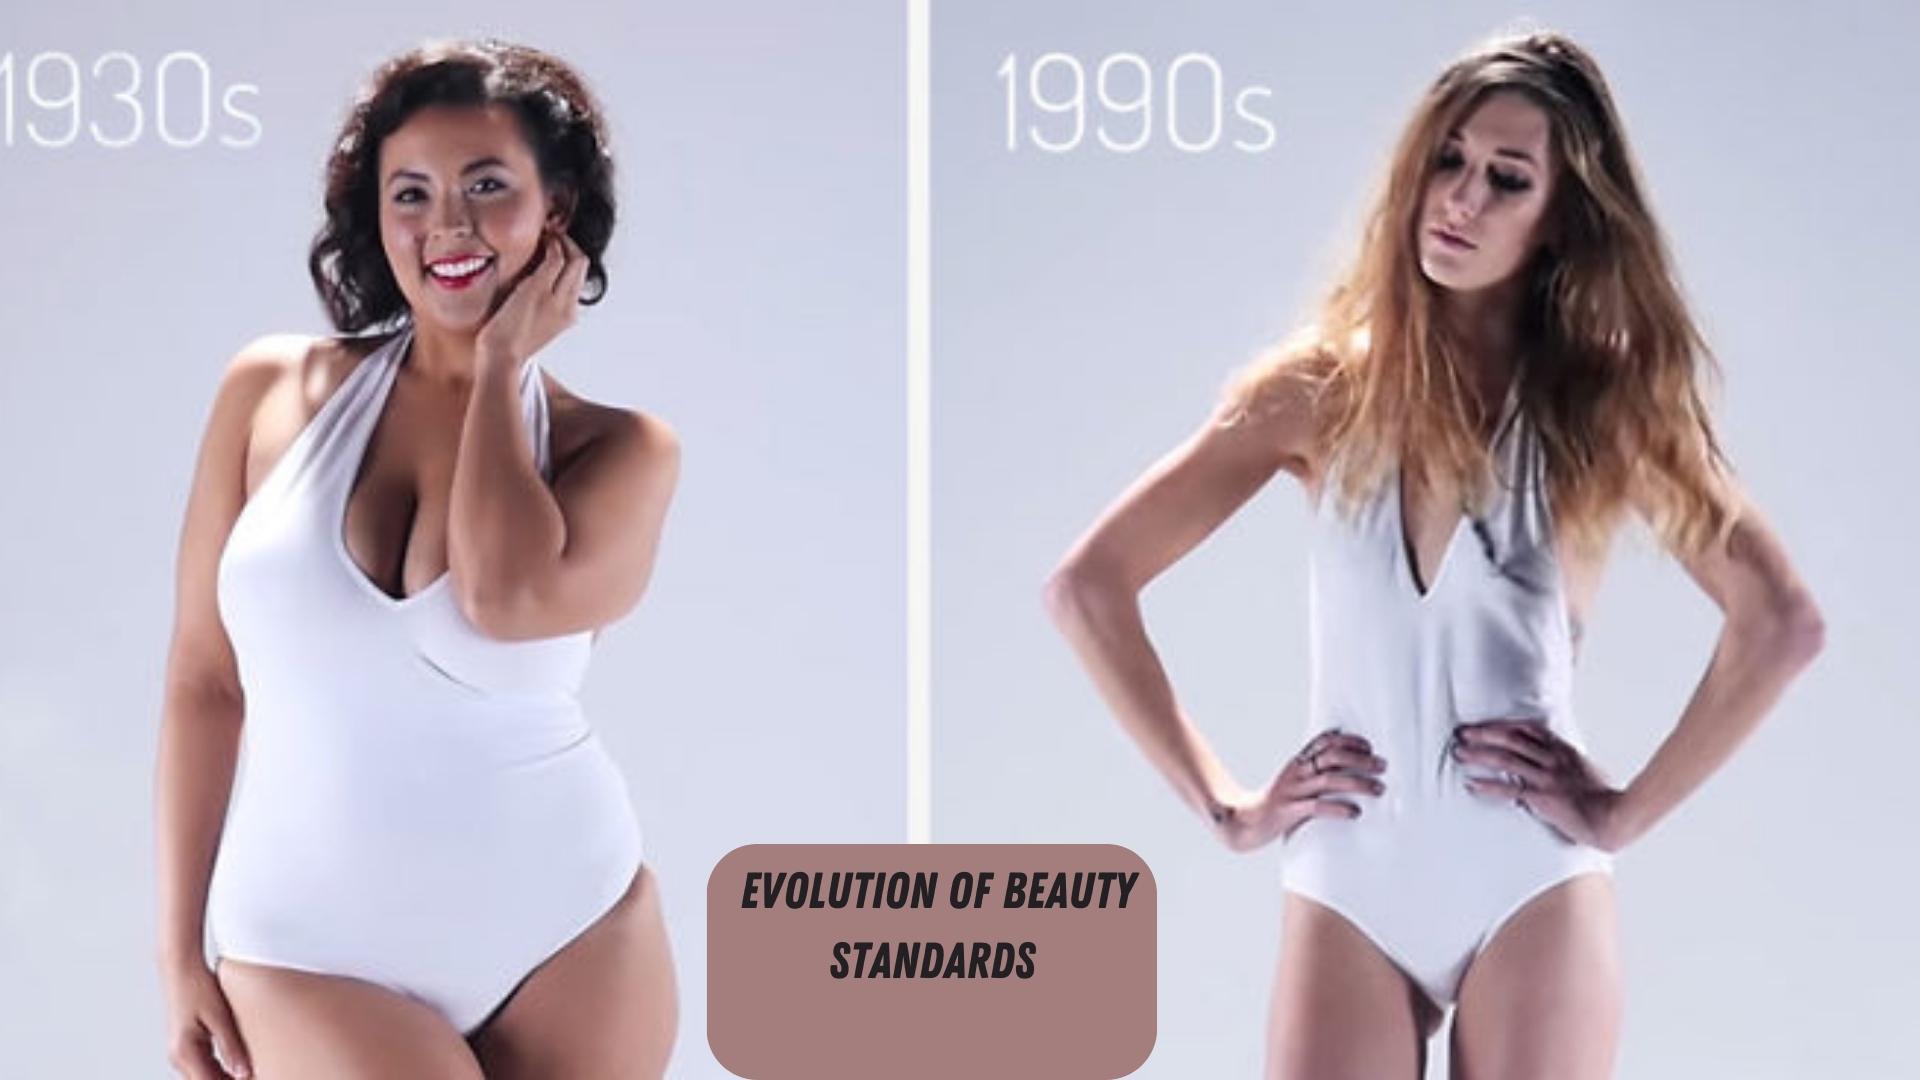 The Evolution of Beauty Standards